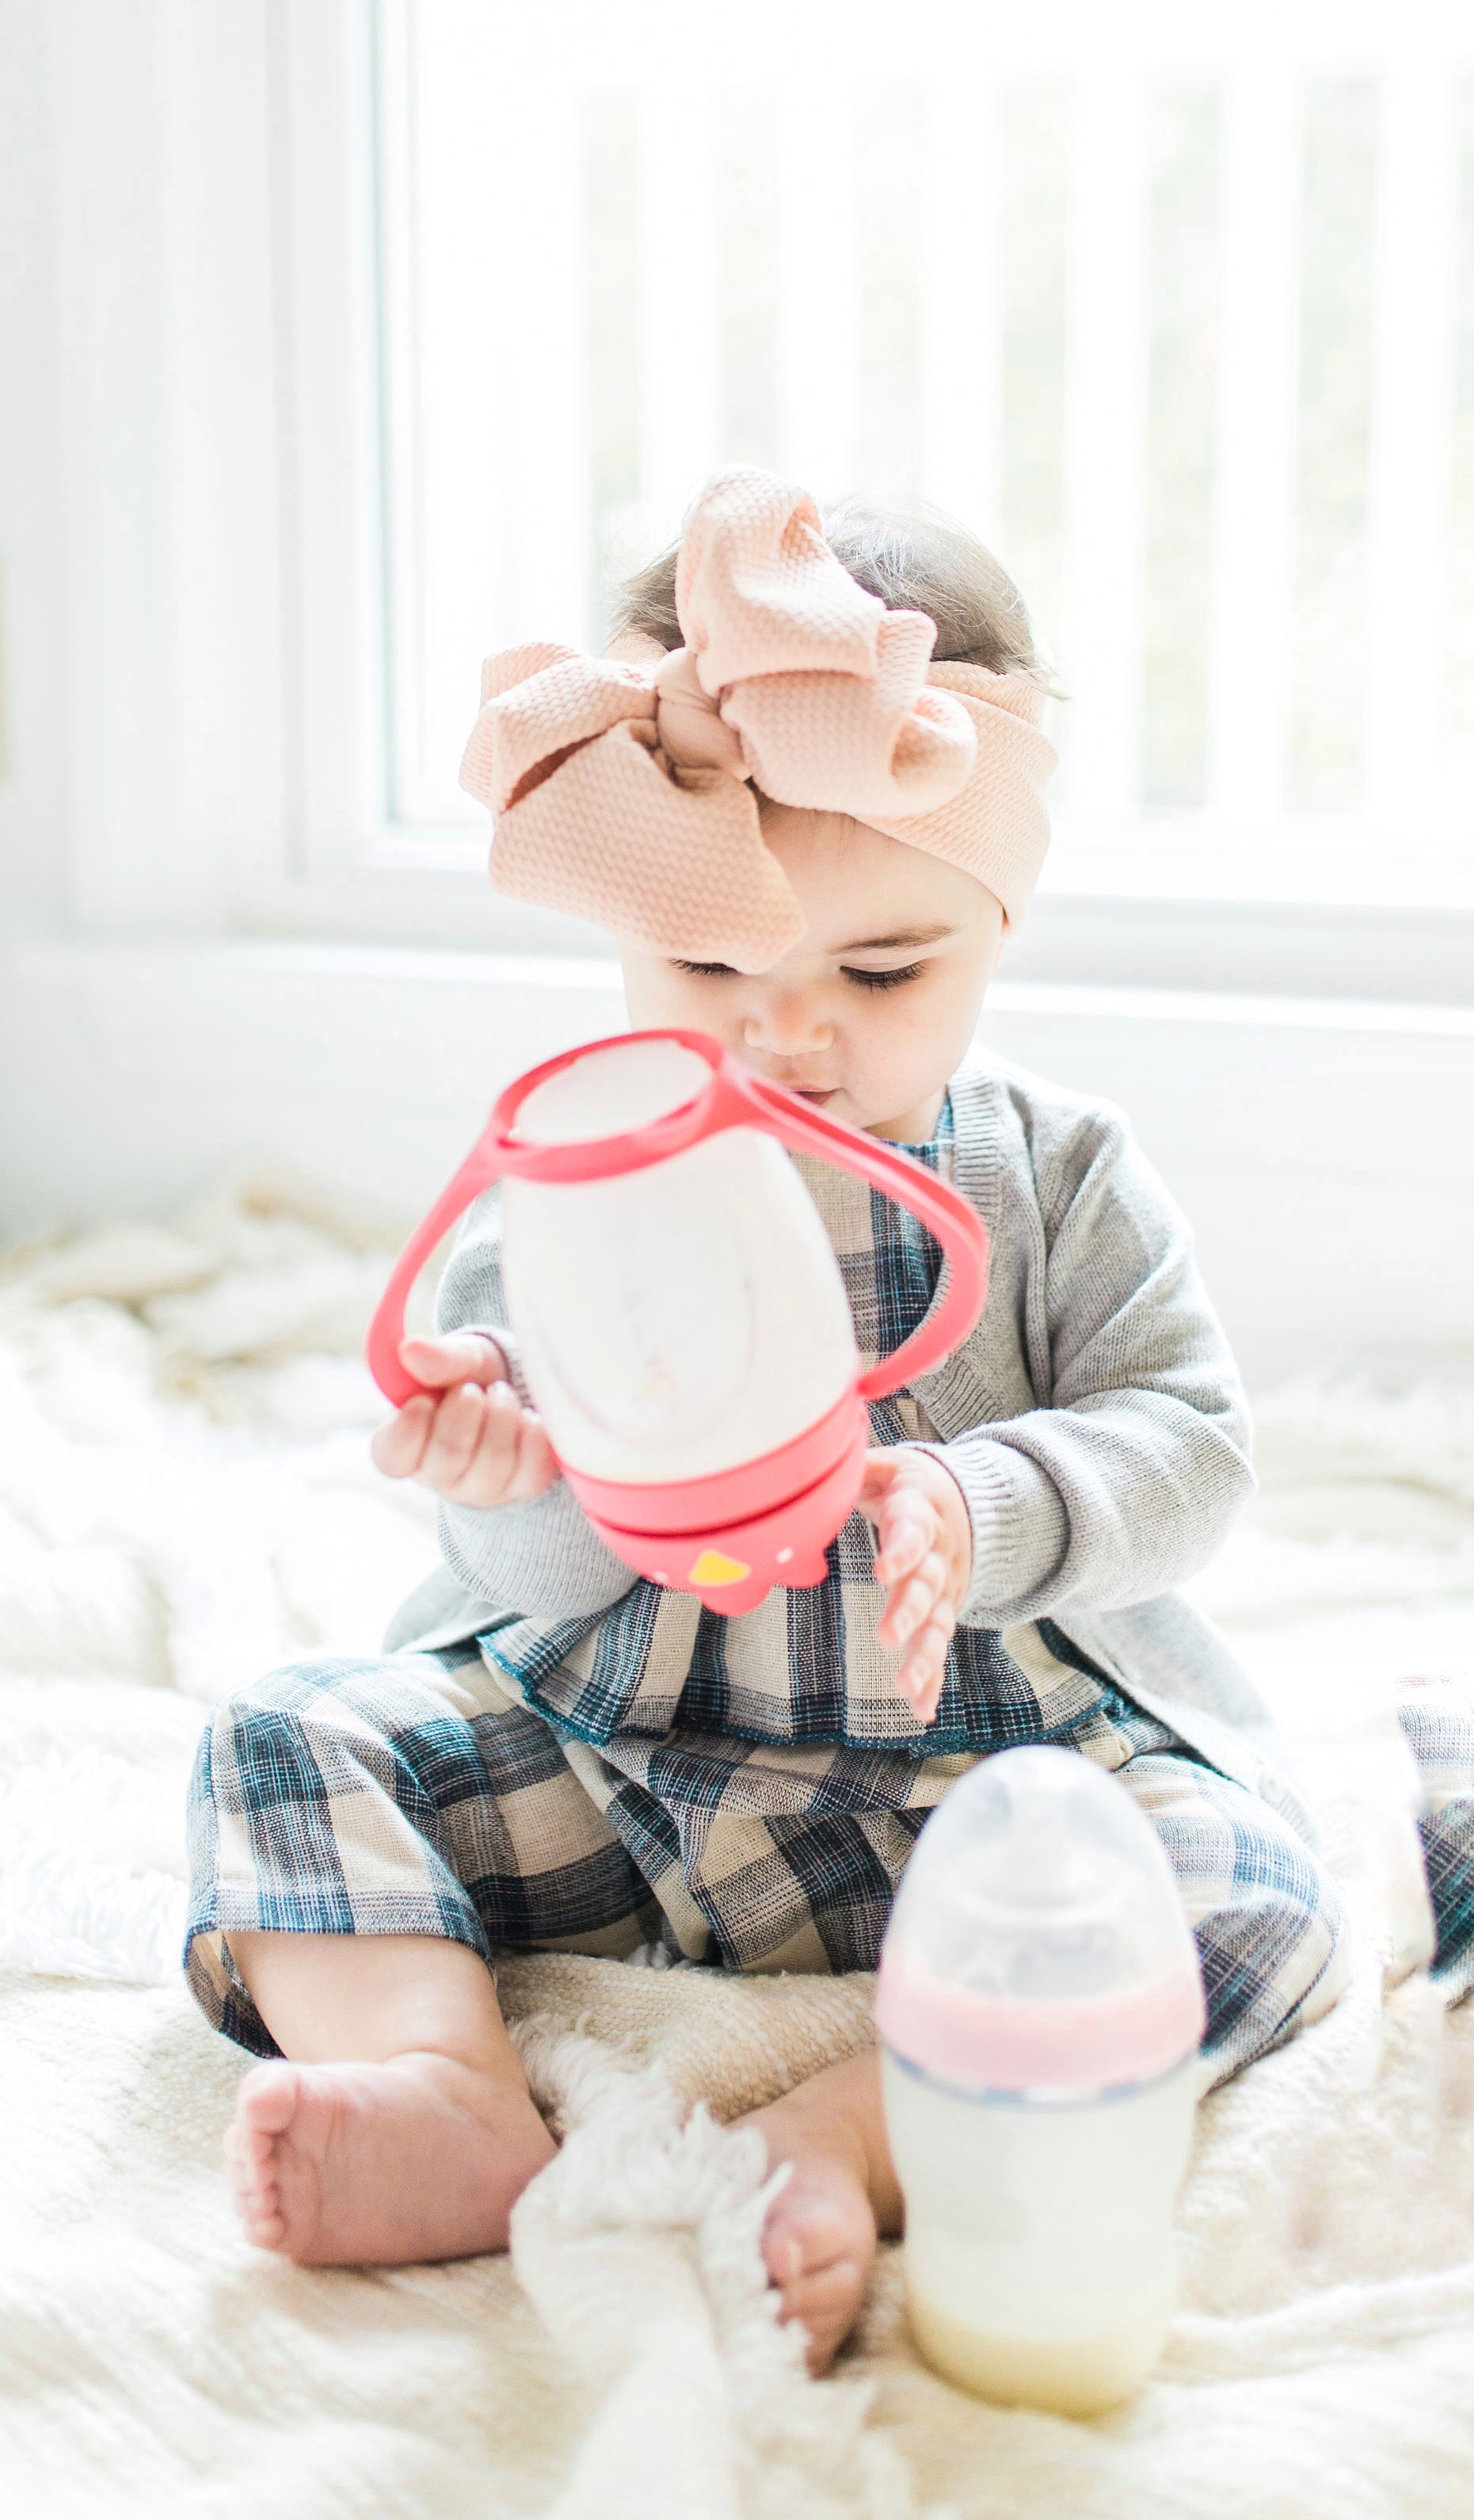 "Teach" Your Baby How to Use the Sippy Cup